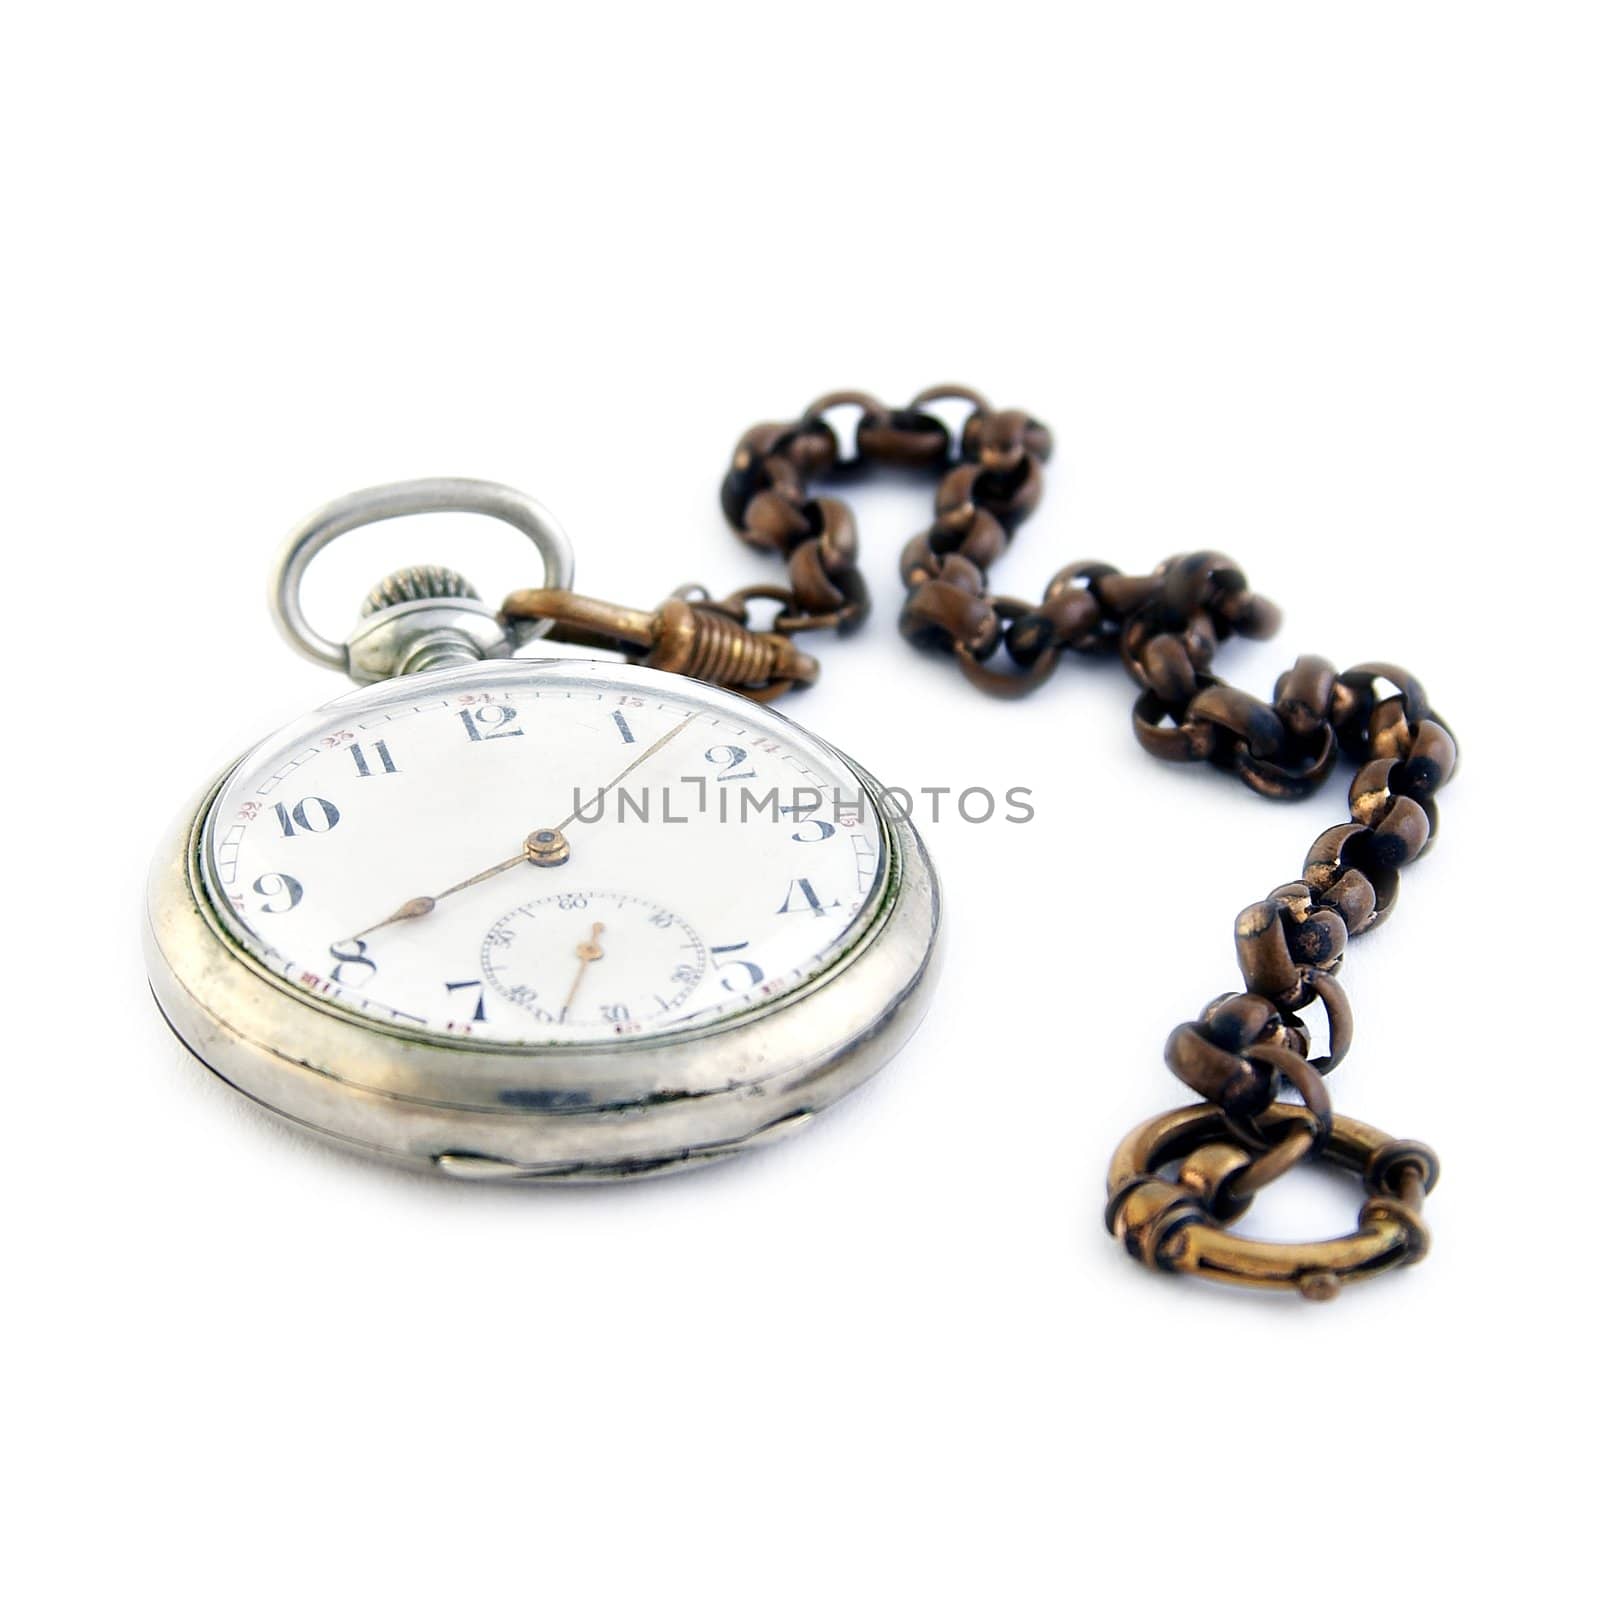 Pocket watch isolated